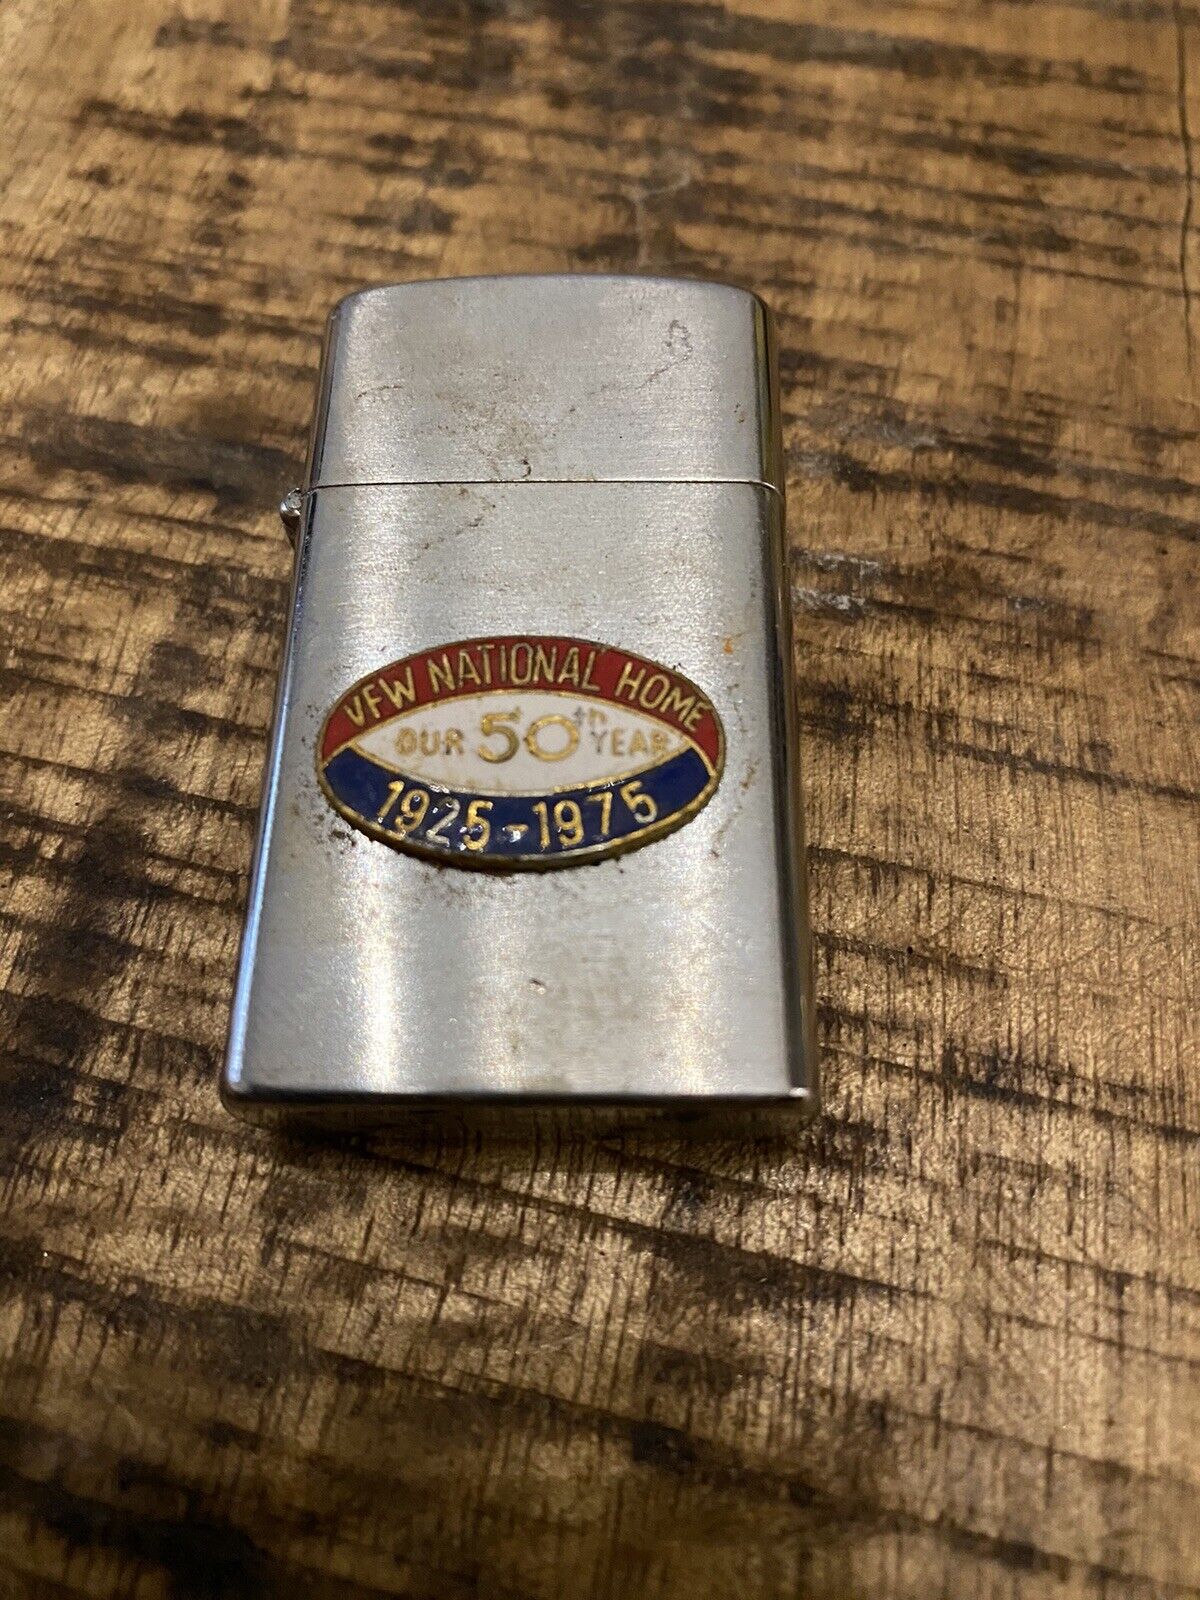 Vintage 1925-1975 VFW NATIONAL HOME 50 Year Windproof Barlow Lighter